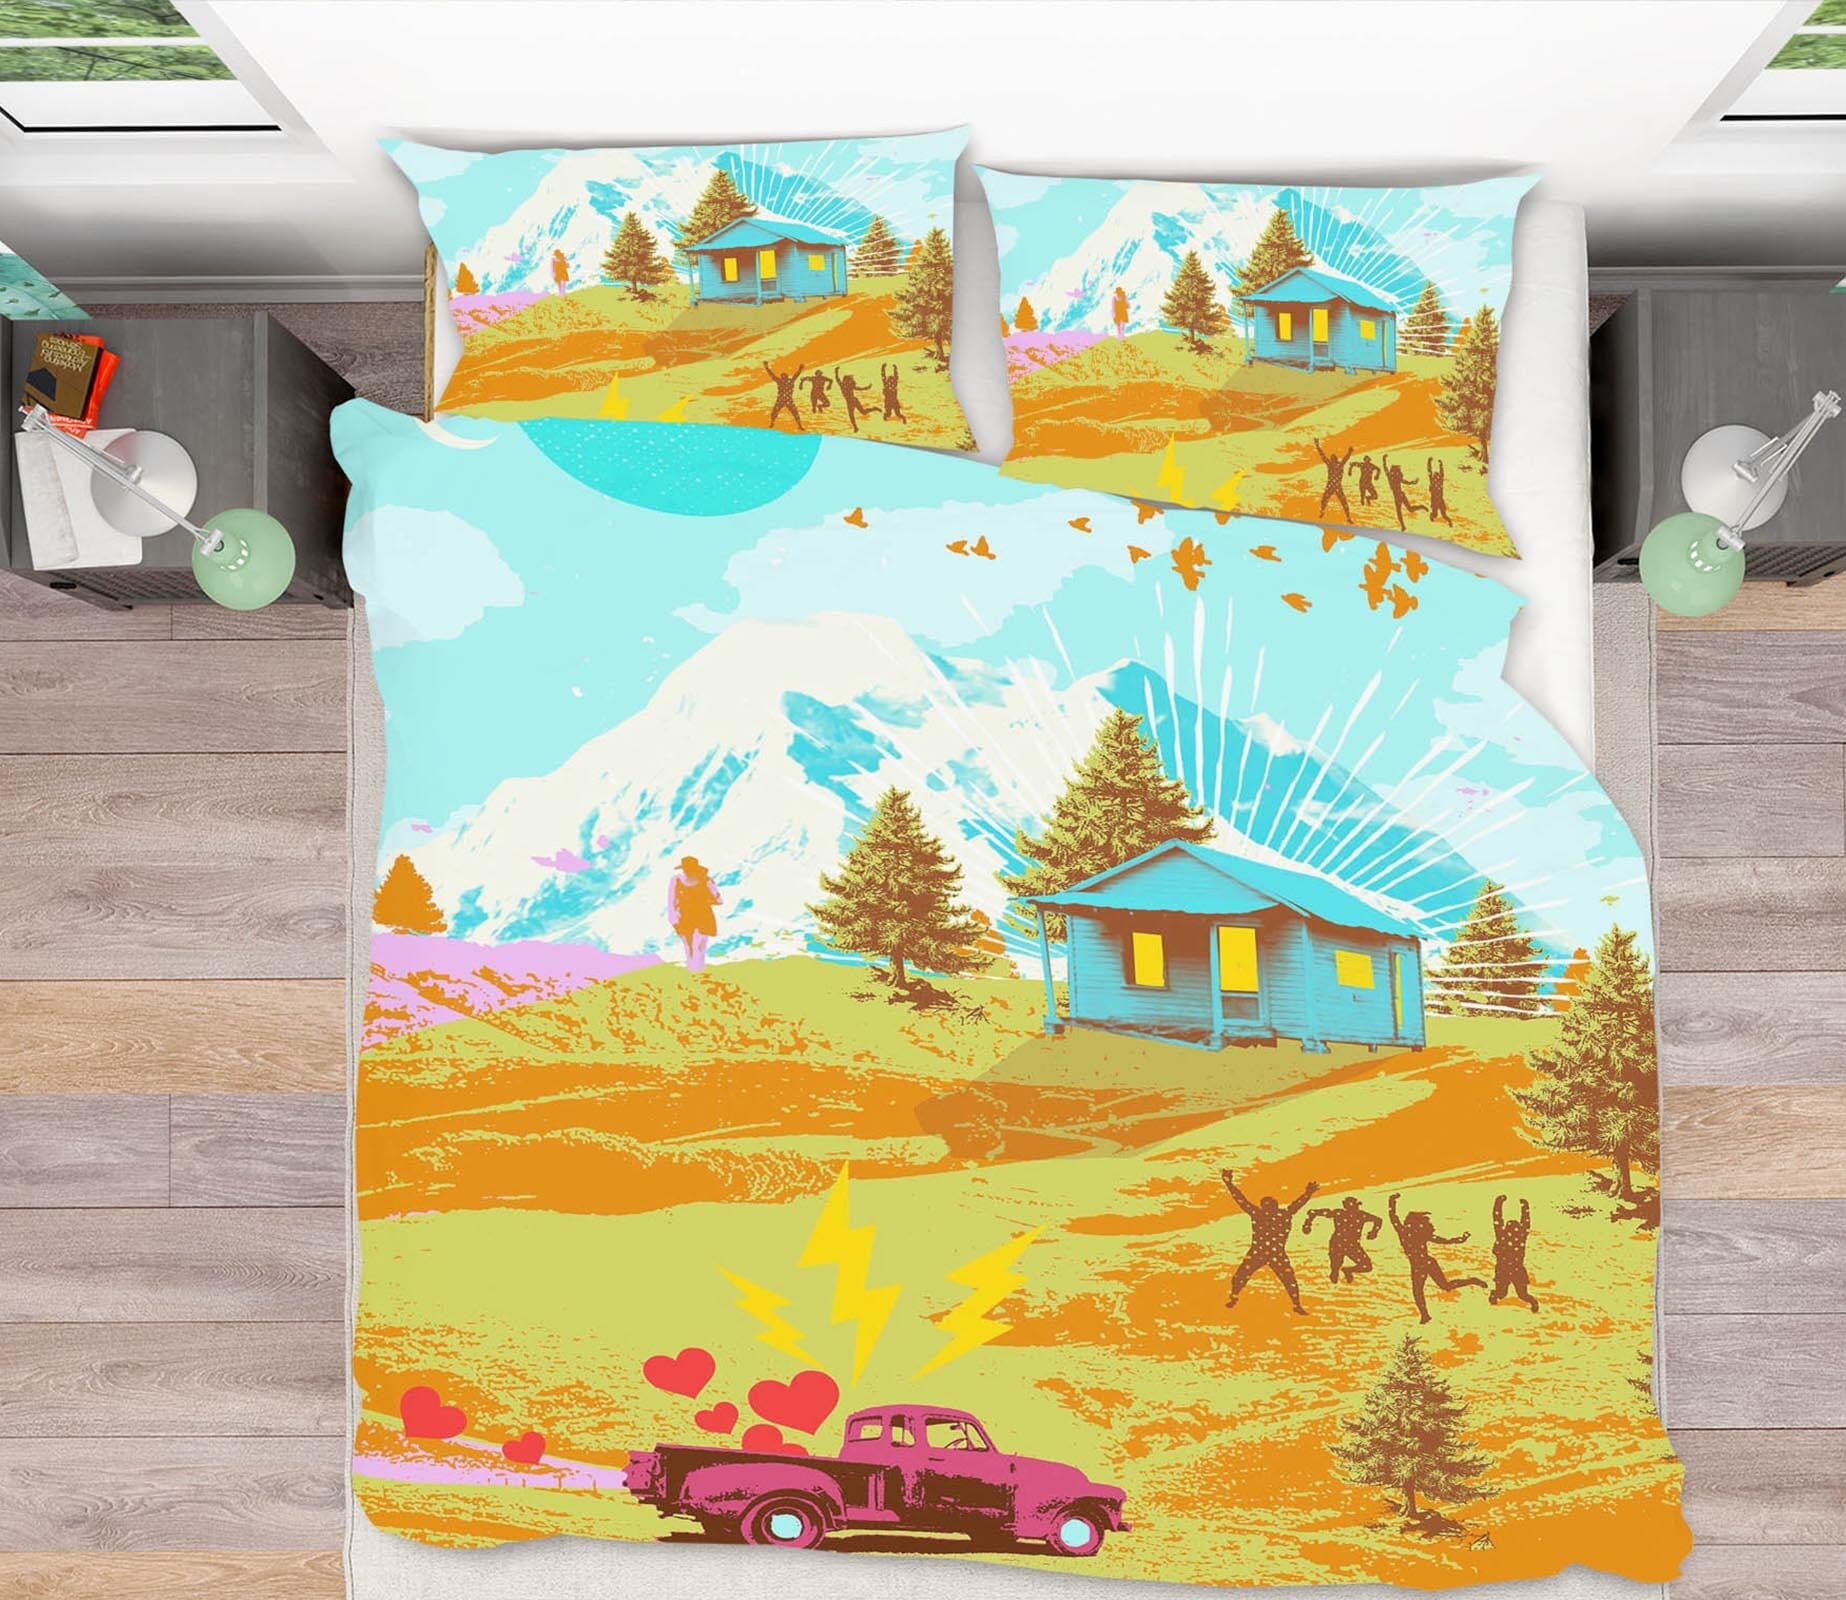 3D Outskirts 2018 Showdeer Bedding Bed Pillowcases Quilt Quiet Covers AJ Creativity Home 